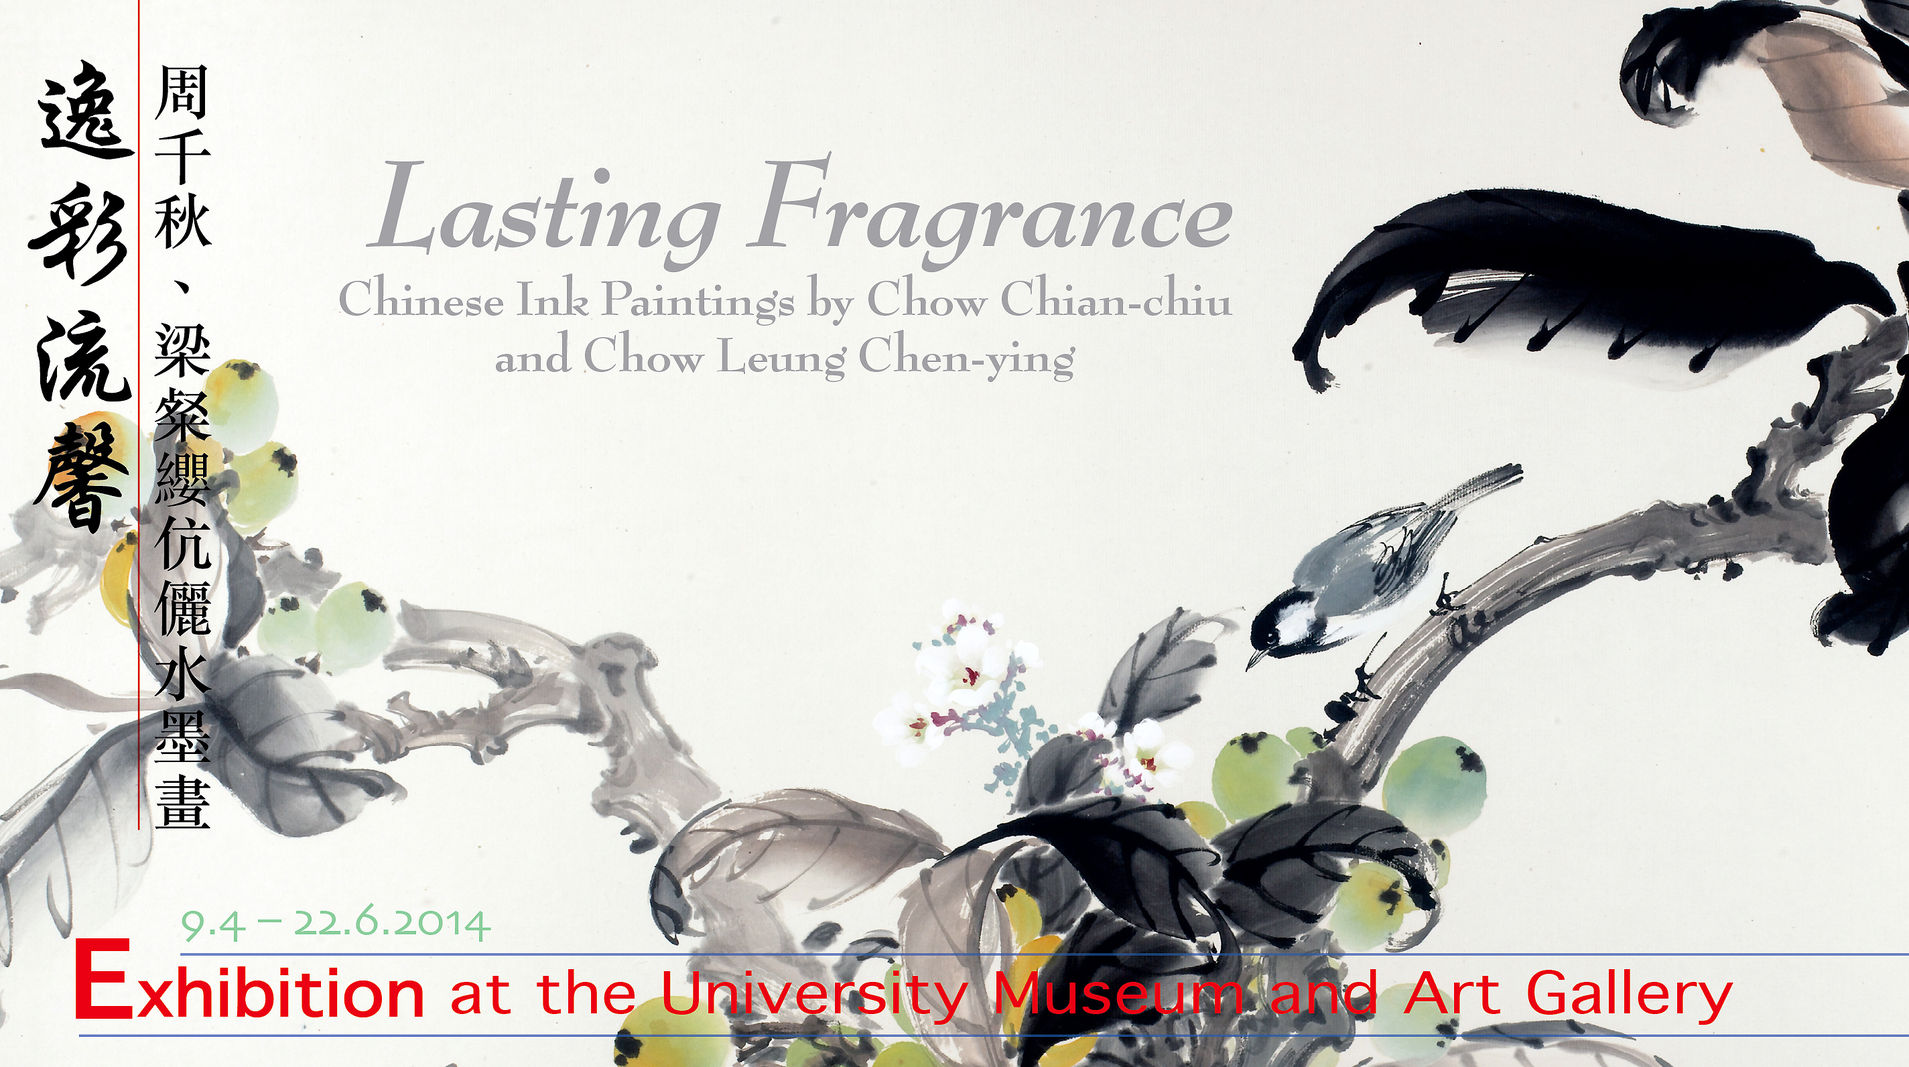 Lasting Fragrance: Chinese Ink Paintings by Chow Chian-chiu and Chow Leung Chen-ying